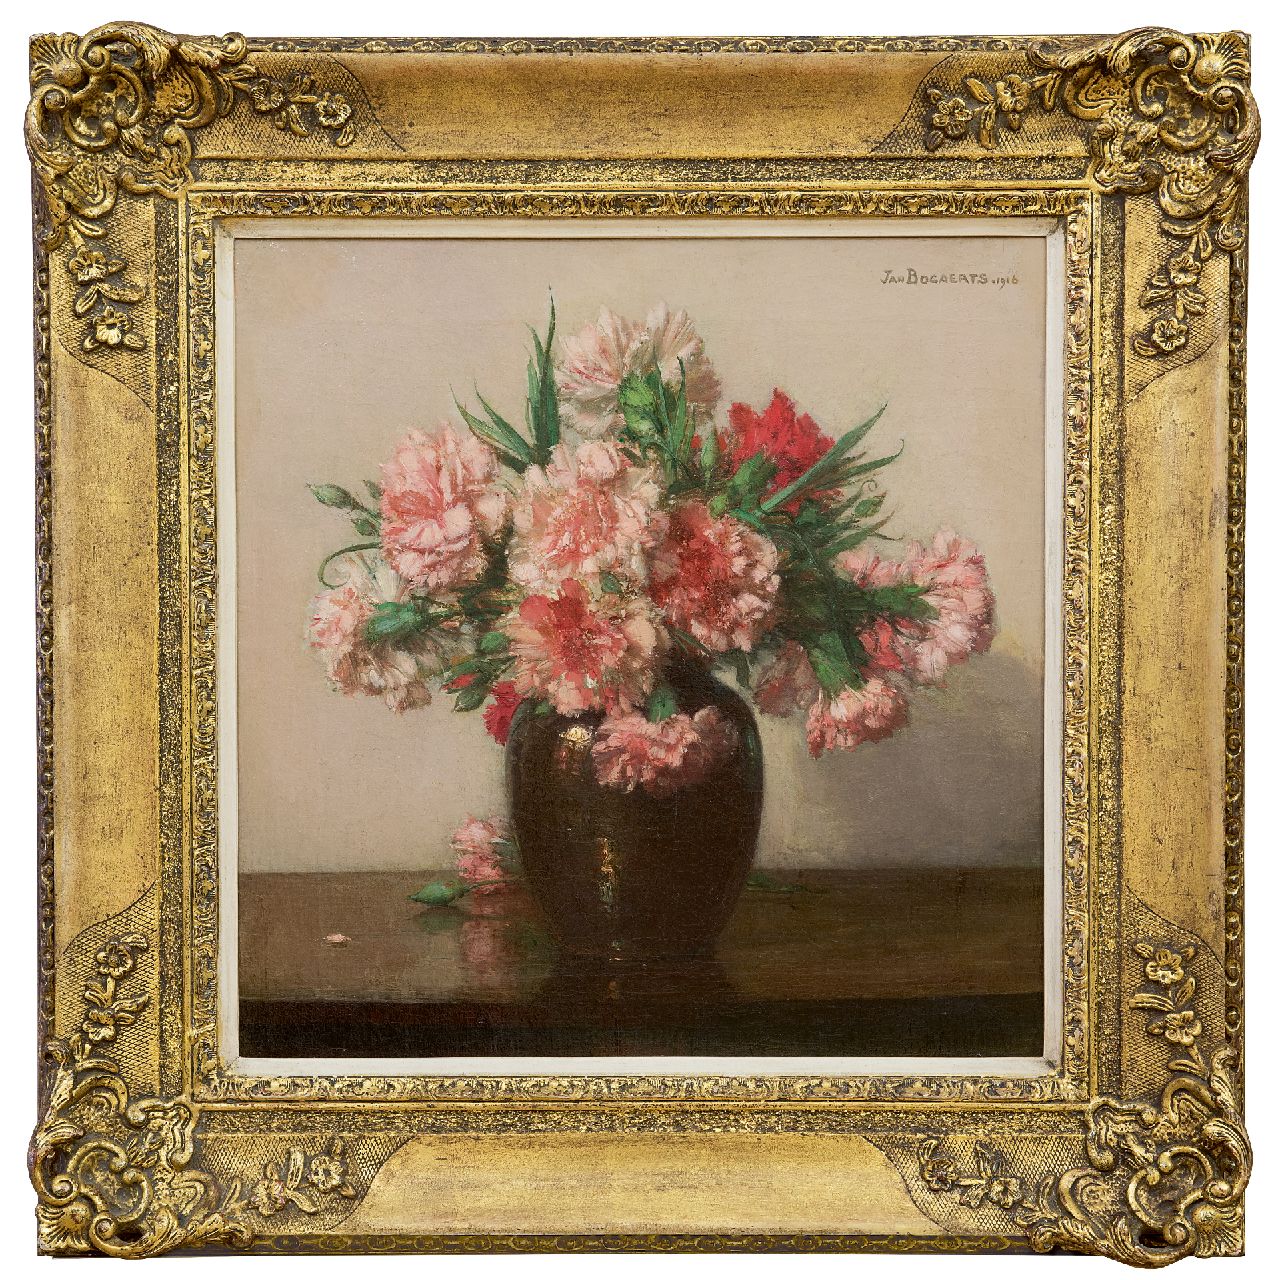 Bogaerts J.J.M.  | Johannes Jacobus Maria 'Jan' Bogaerts | Paintings offered for sale | Pink carnations, oil on canvas 39.6 x 38.5 cm, signed u.r. and dated 1916